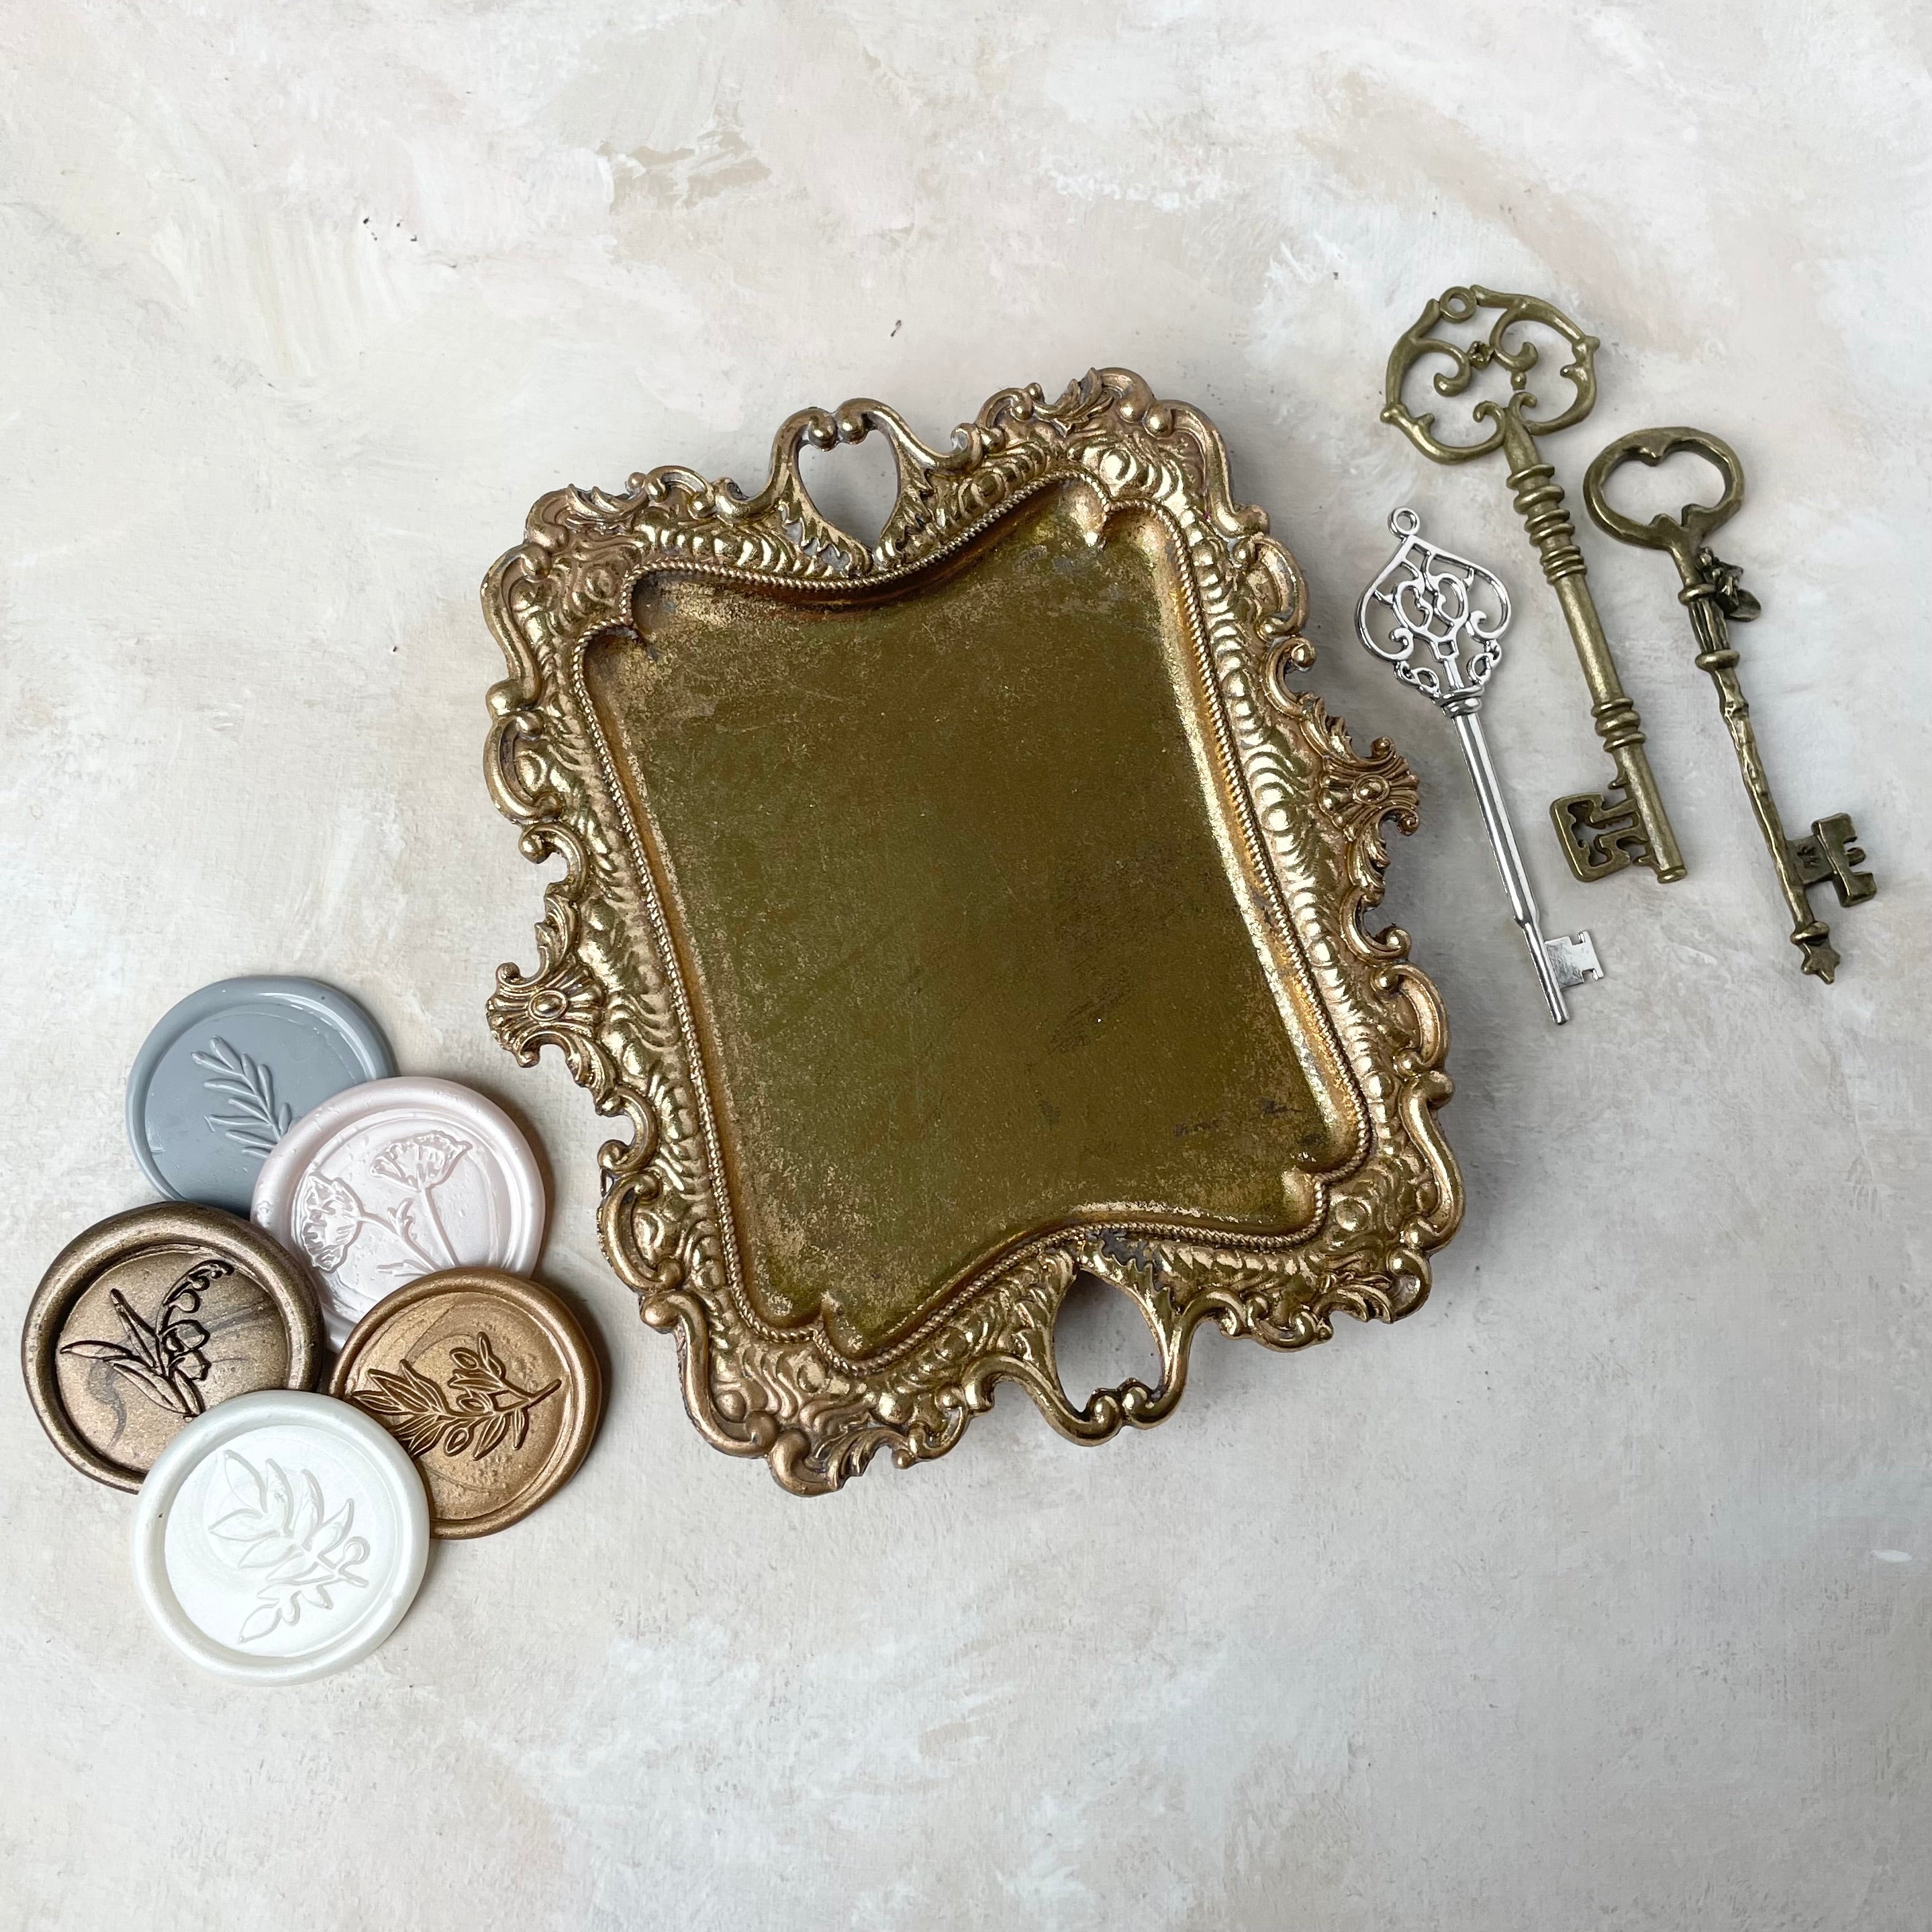 Styling Keys and Classic wax seals beside gold vintage tray - Wedding Flat lay props from Champagne & GRIT